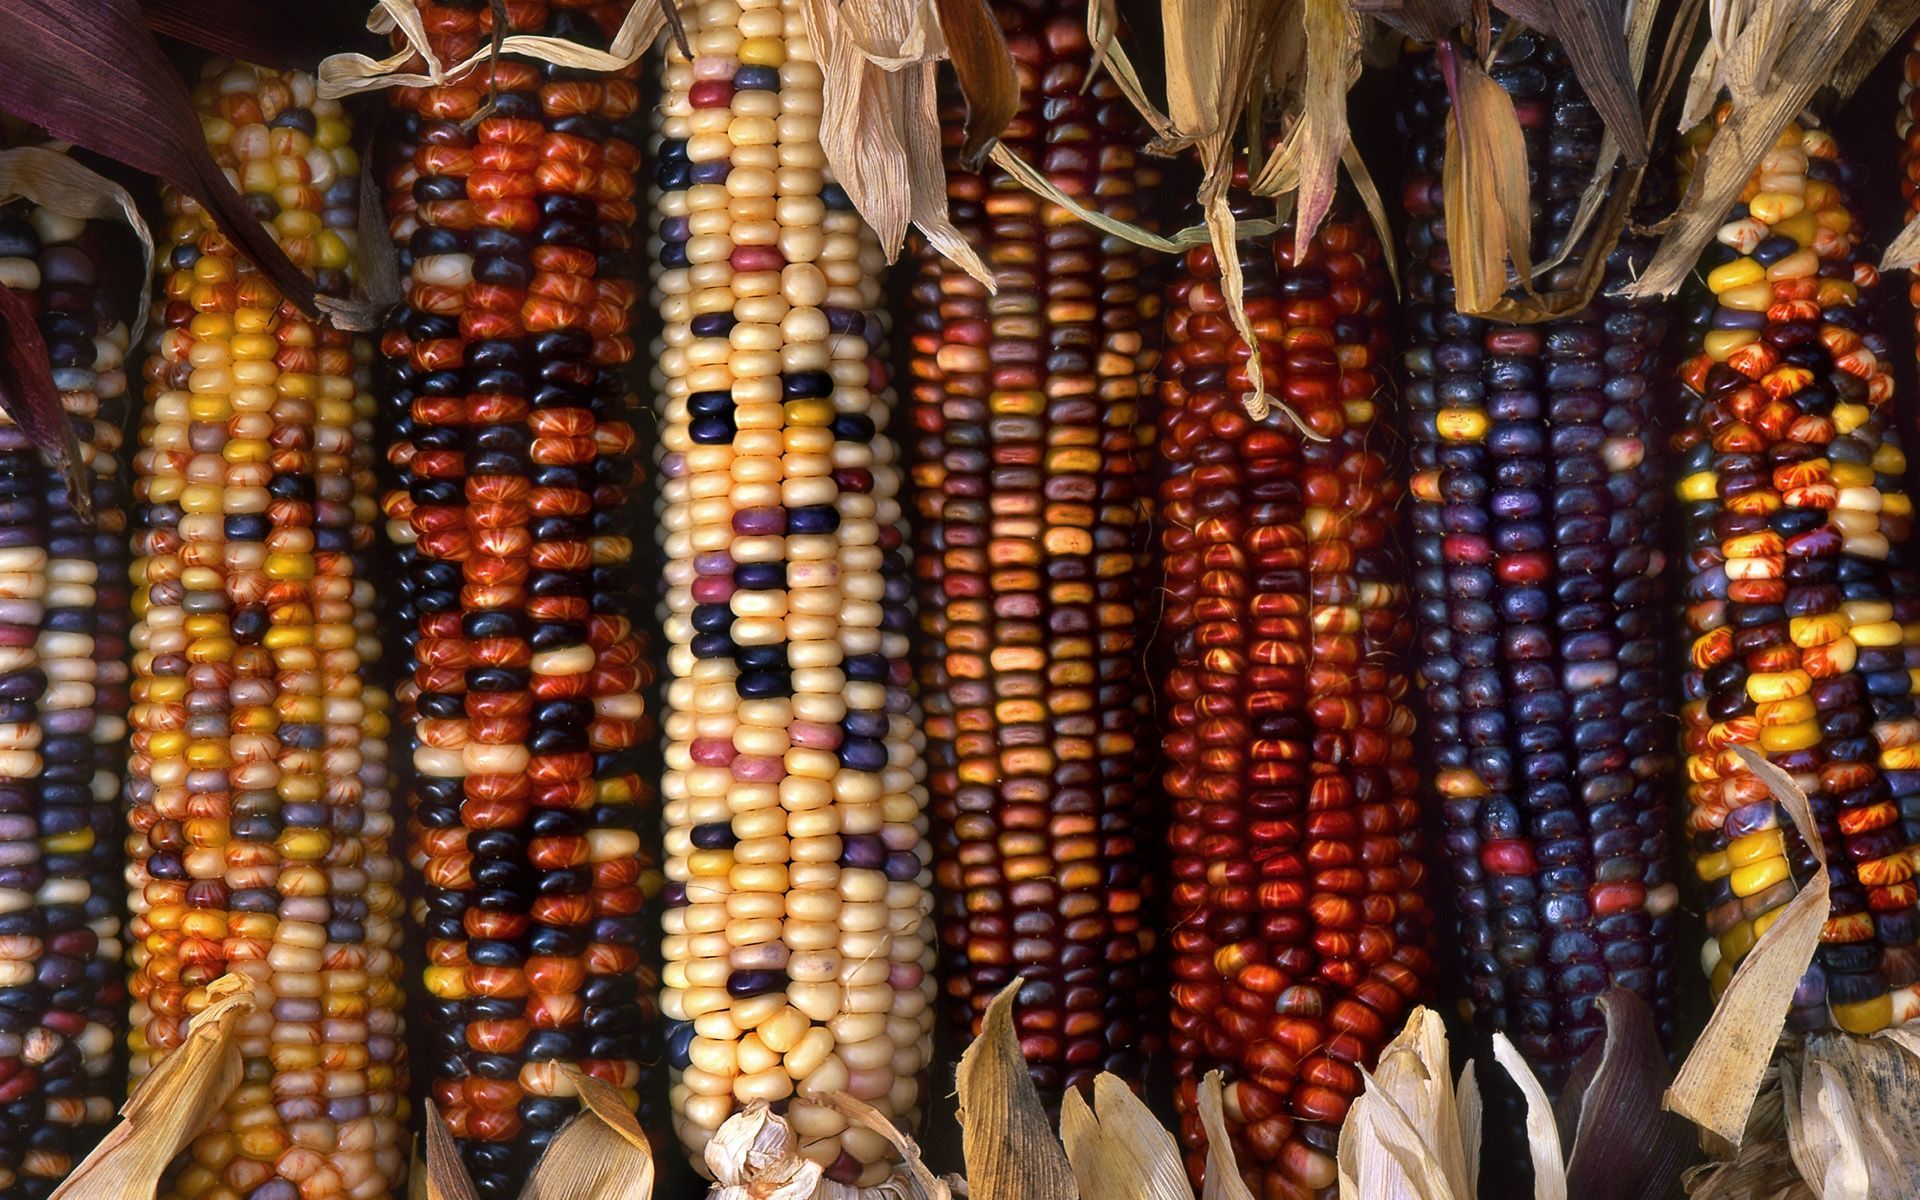 Fall Harvest HD Picture Wallpaper 3815. Rainbow corn, Indian